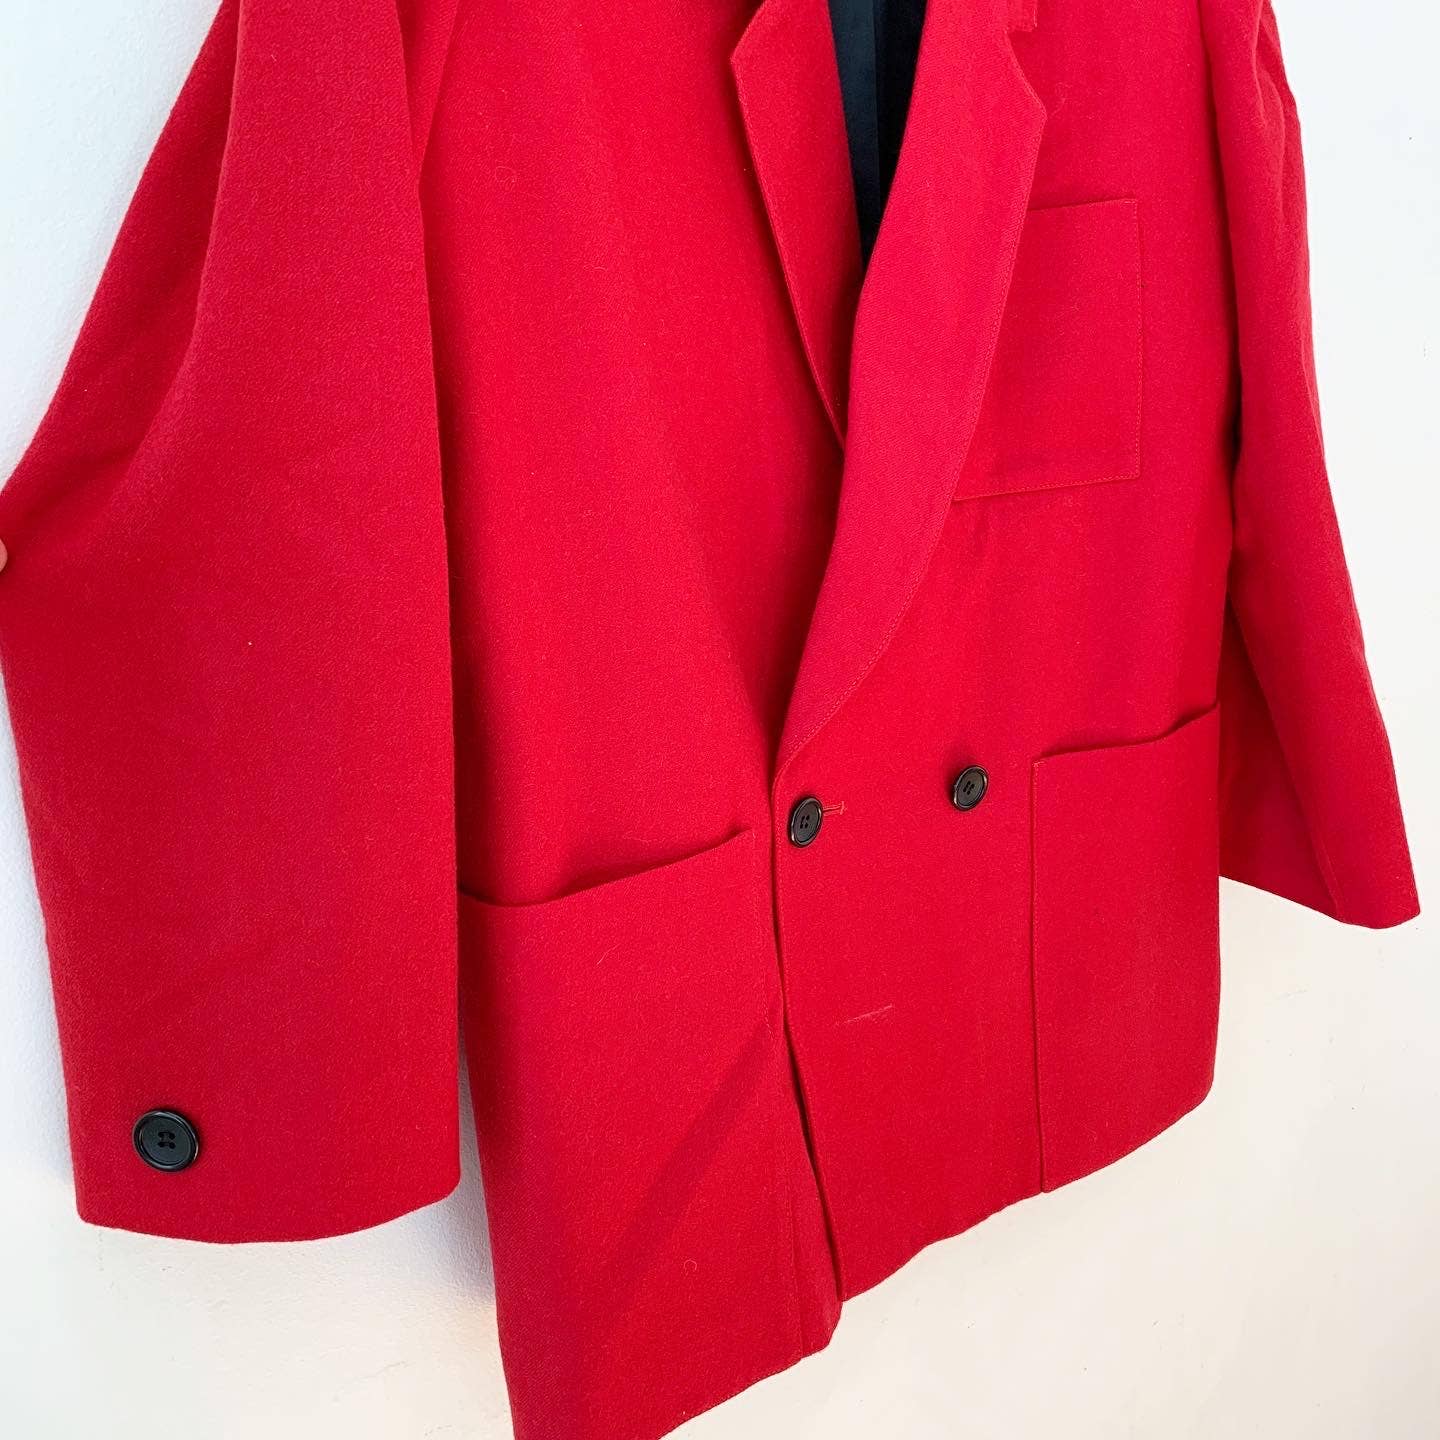 Vintage Red Wool Double Breasted Blazer